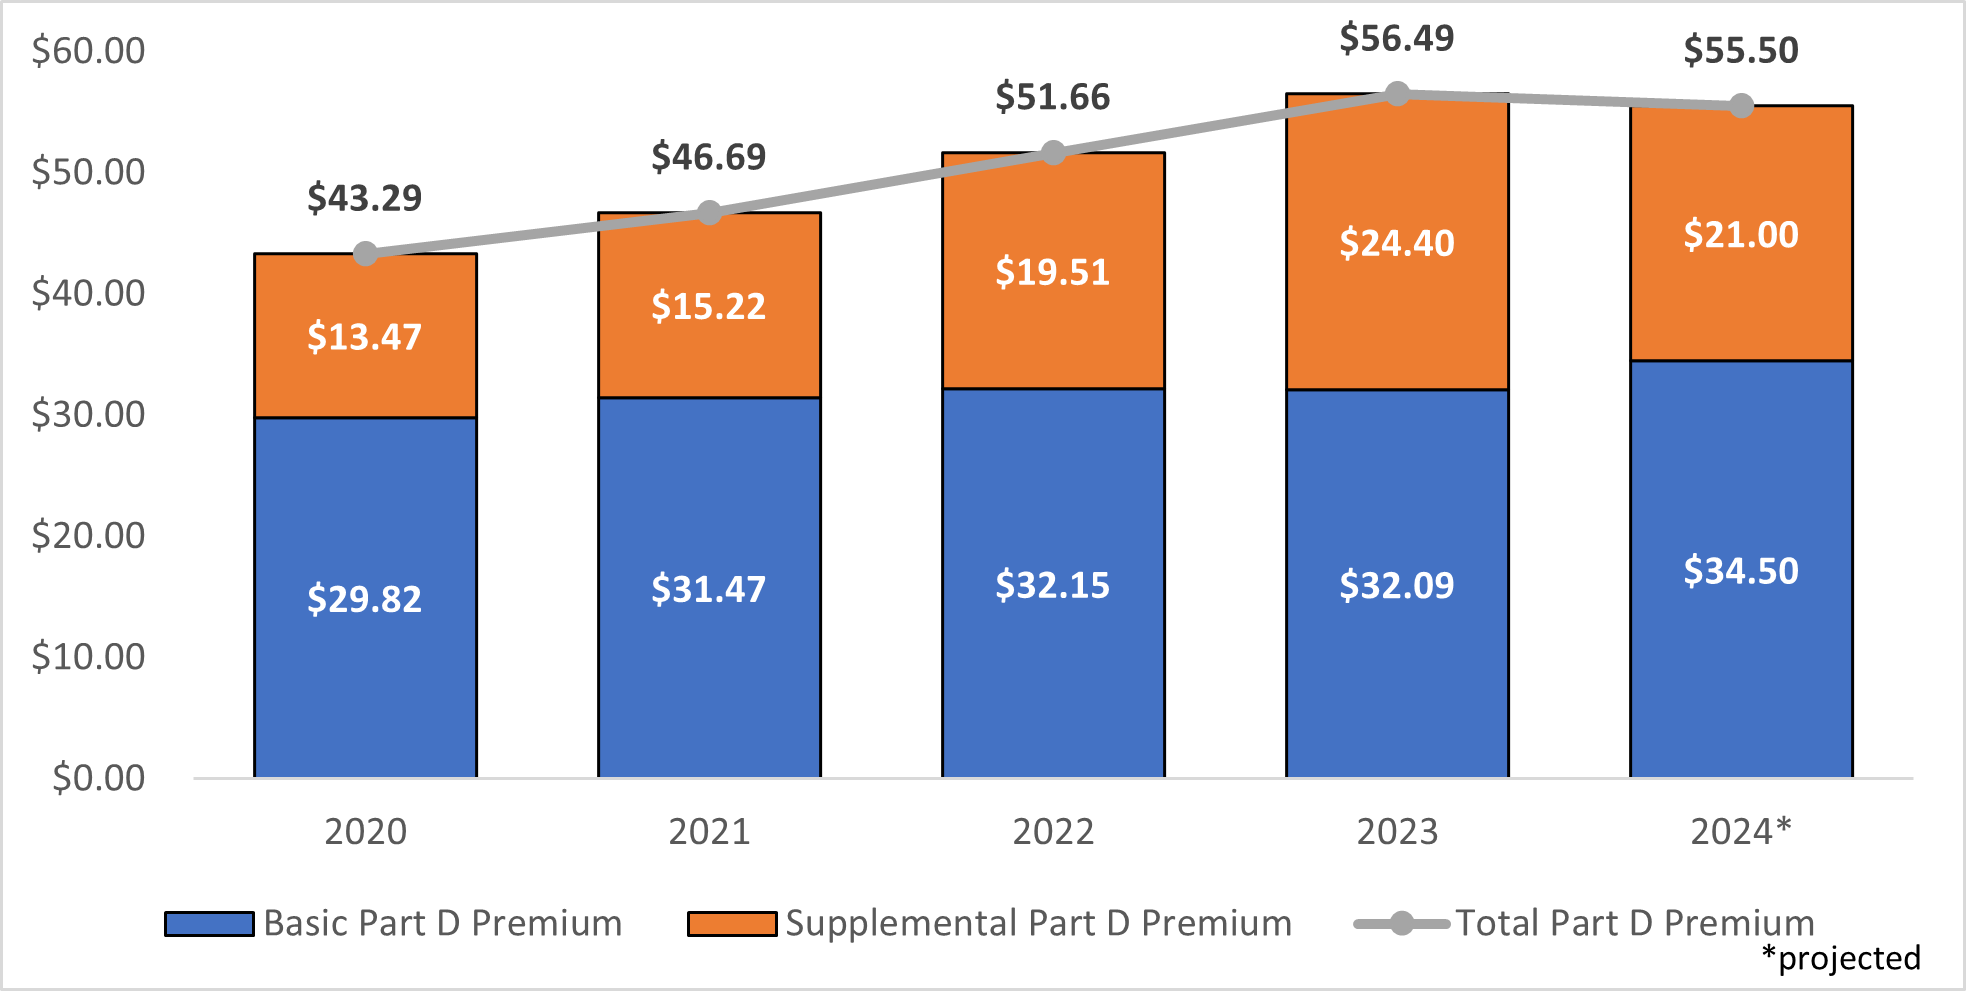 CMS Releases 2024 Projected Medicare Part D Premium and Bid Information CMS